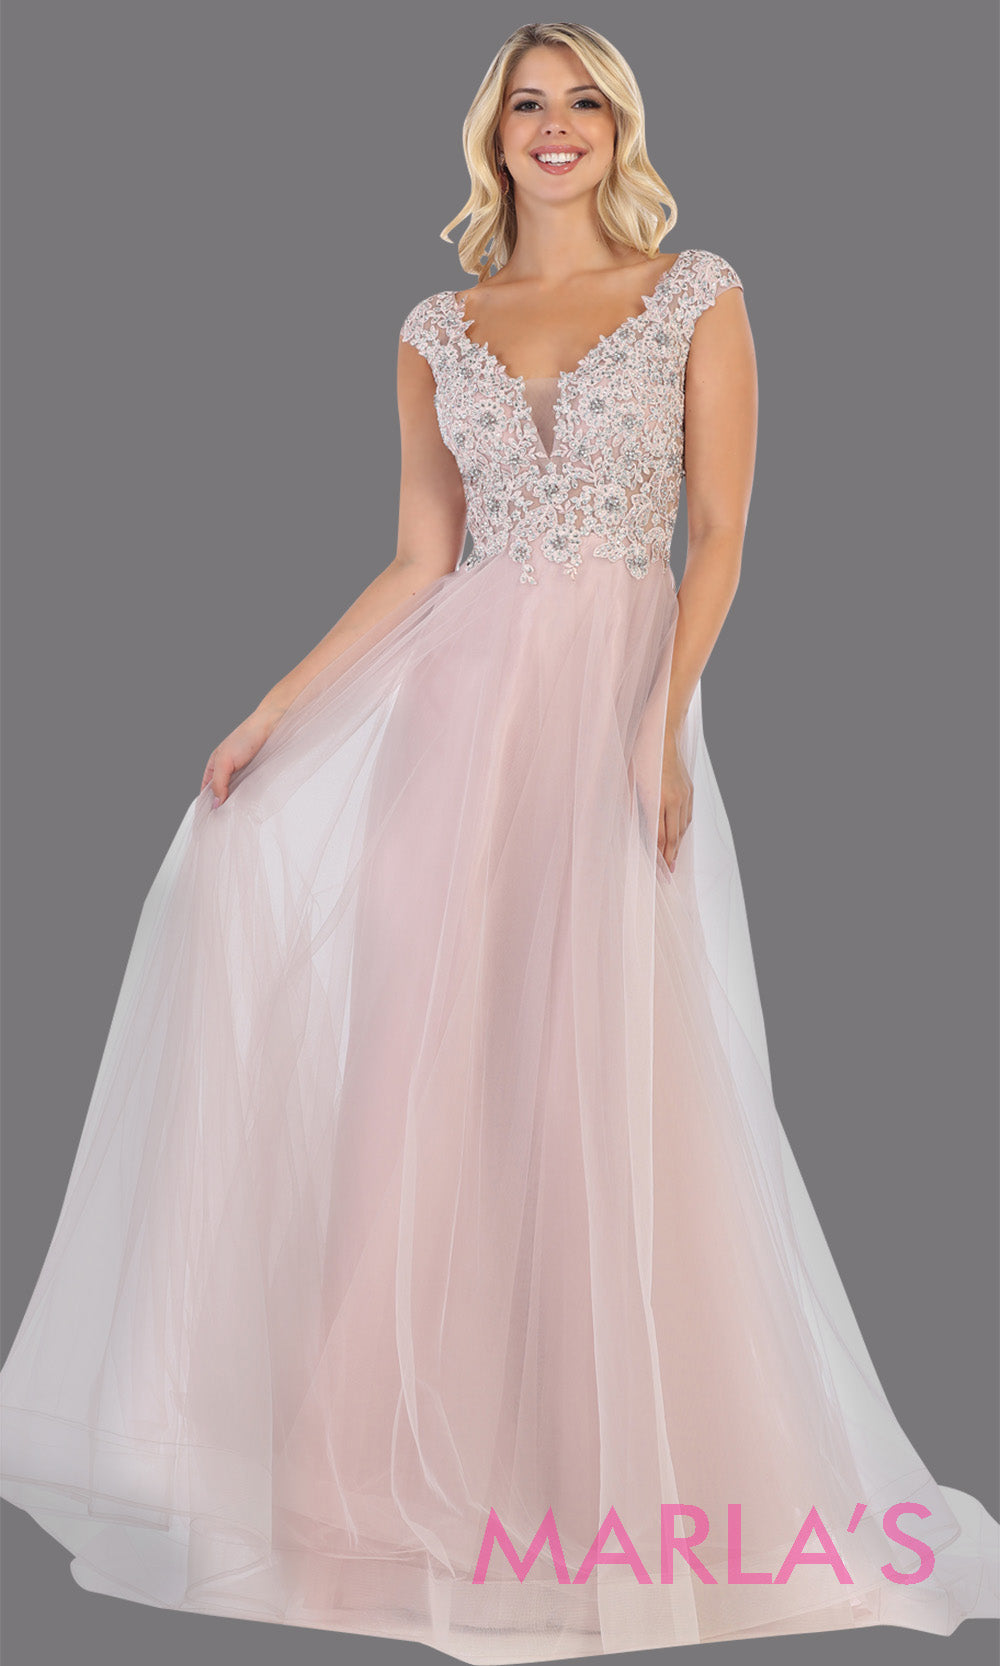 Long v neck flowy mauve pink semi ballgown with lace top & wide straps from mayqueen. This floor length light pink dress is perfect for prom, formal wedding guest dress, indowestern party gown, engagement dress, eshoot, plus size party dress